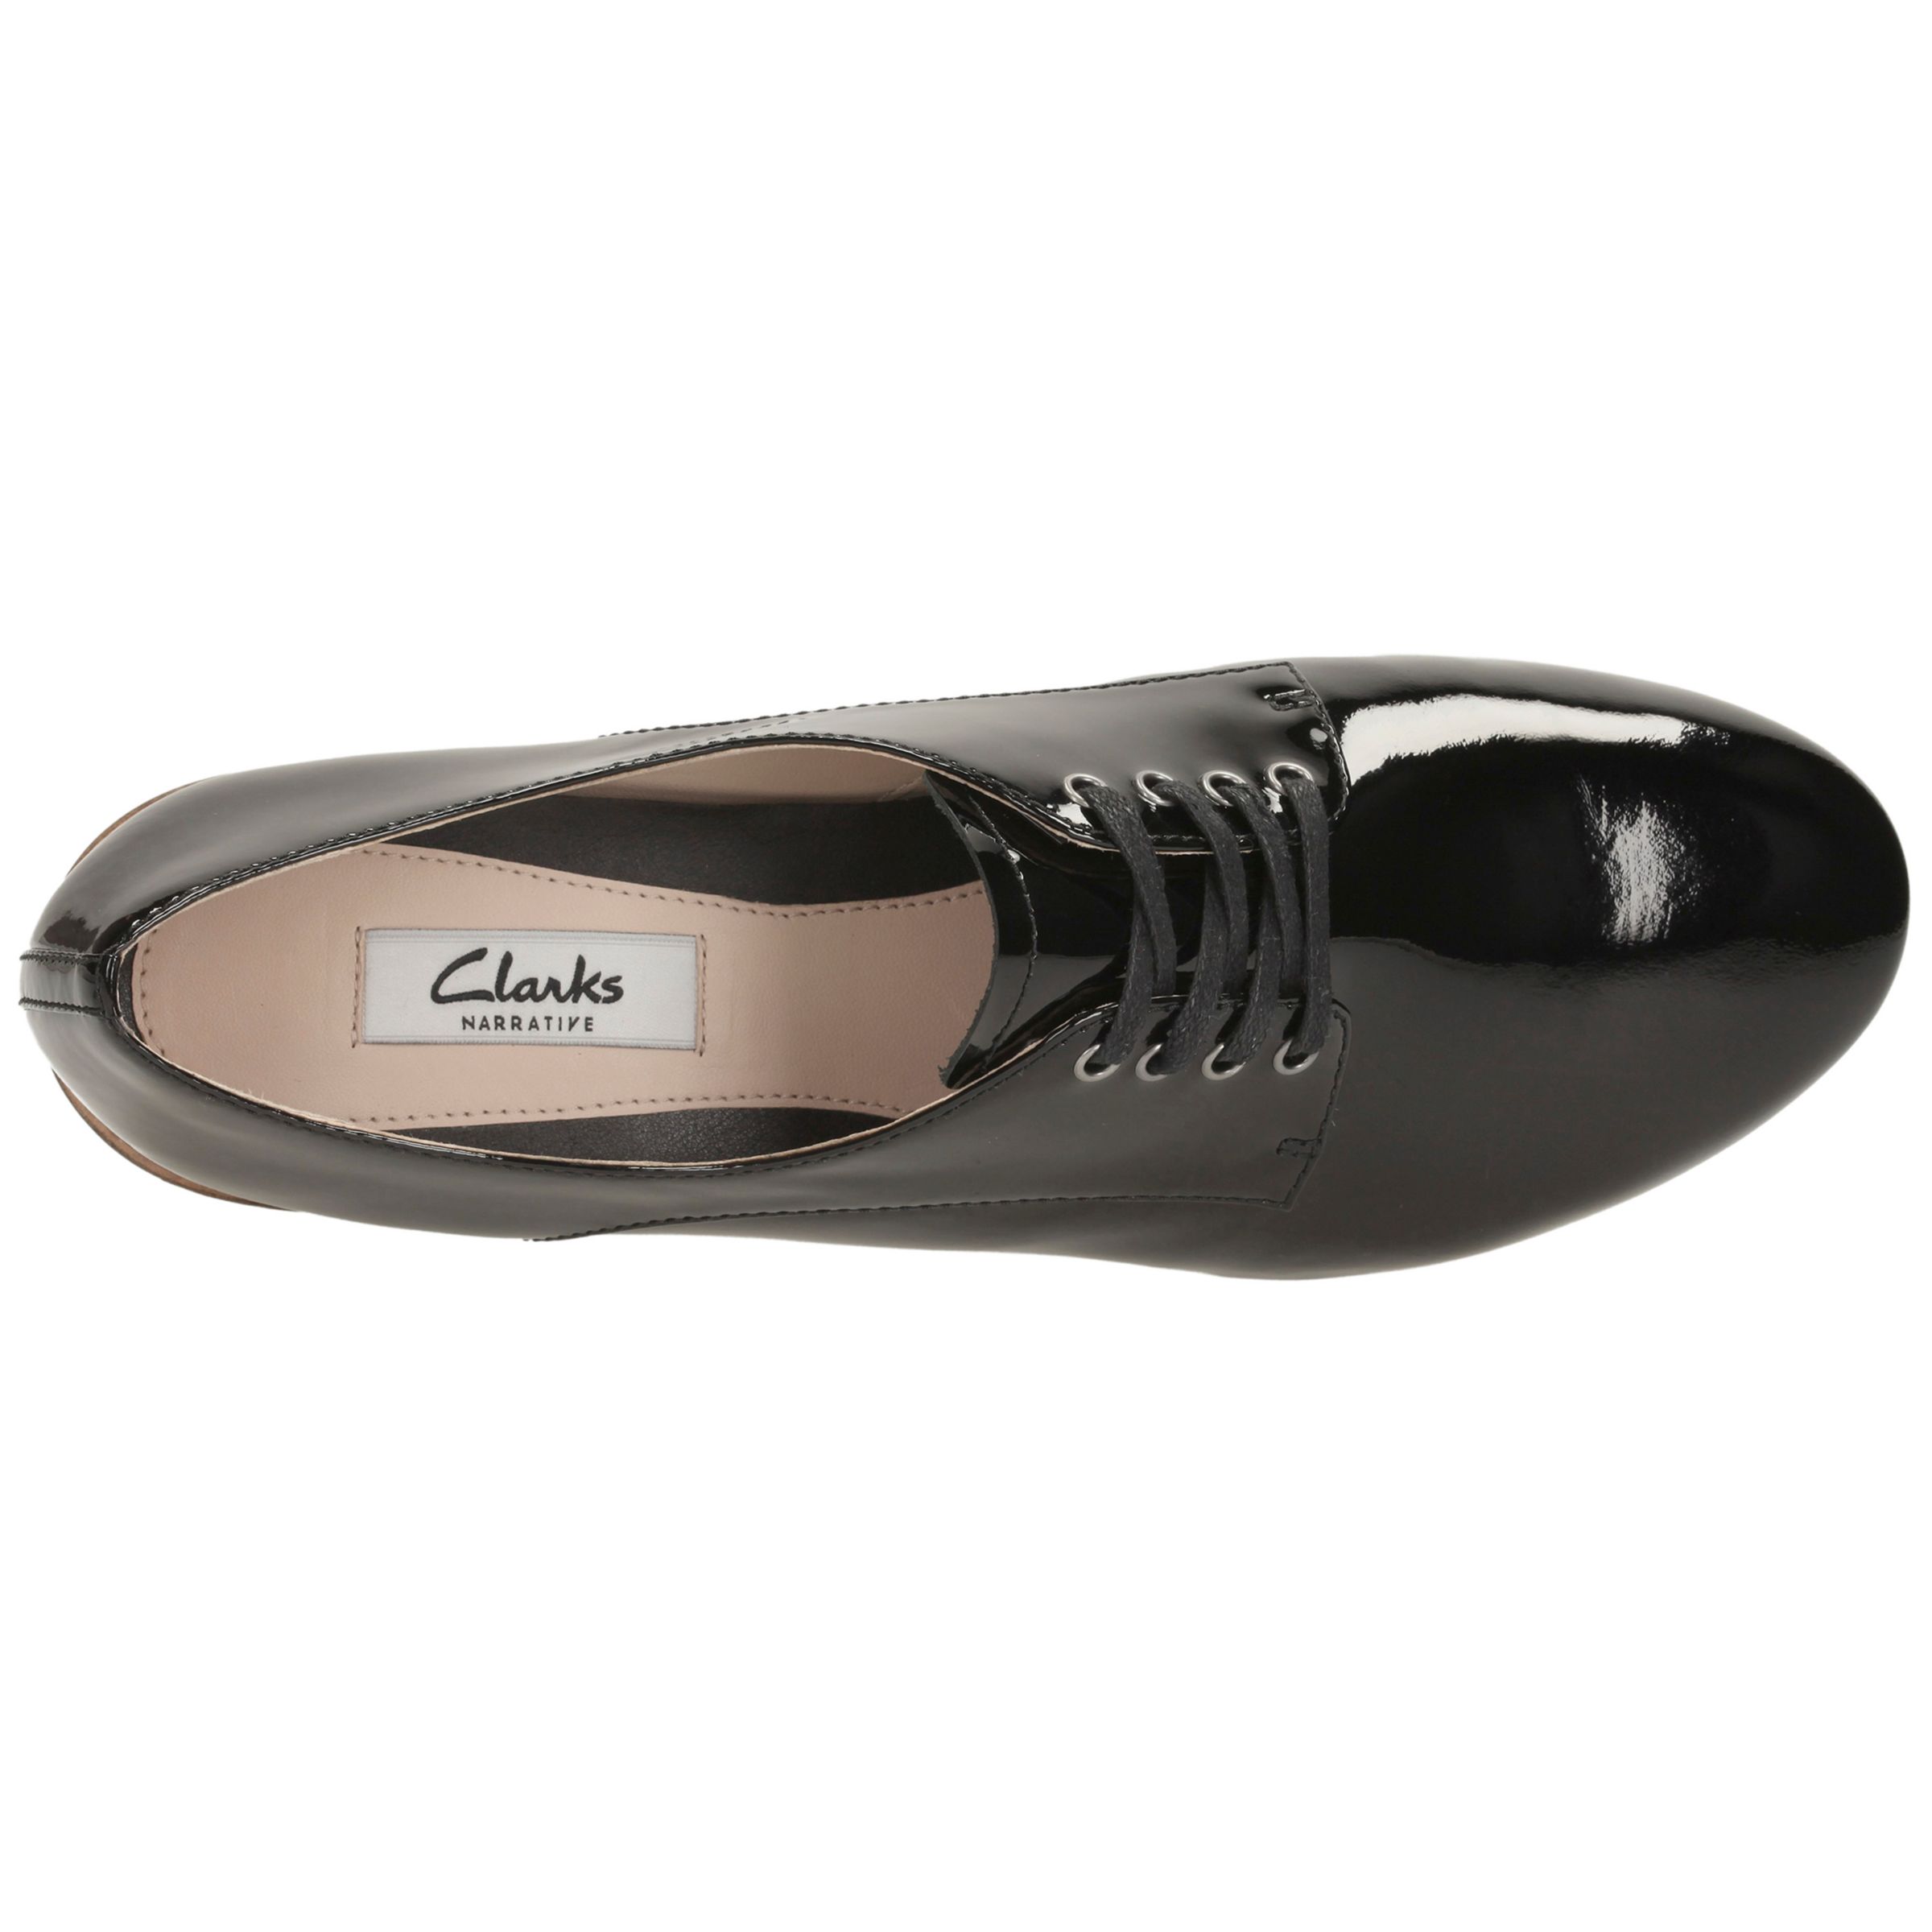 Clarks Festival Gala Patent Leather 